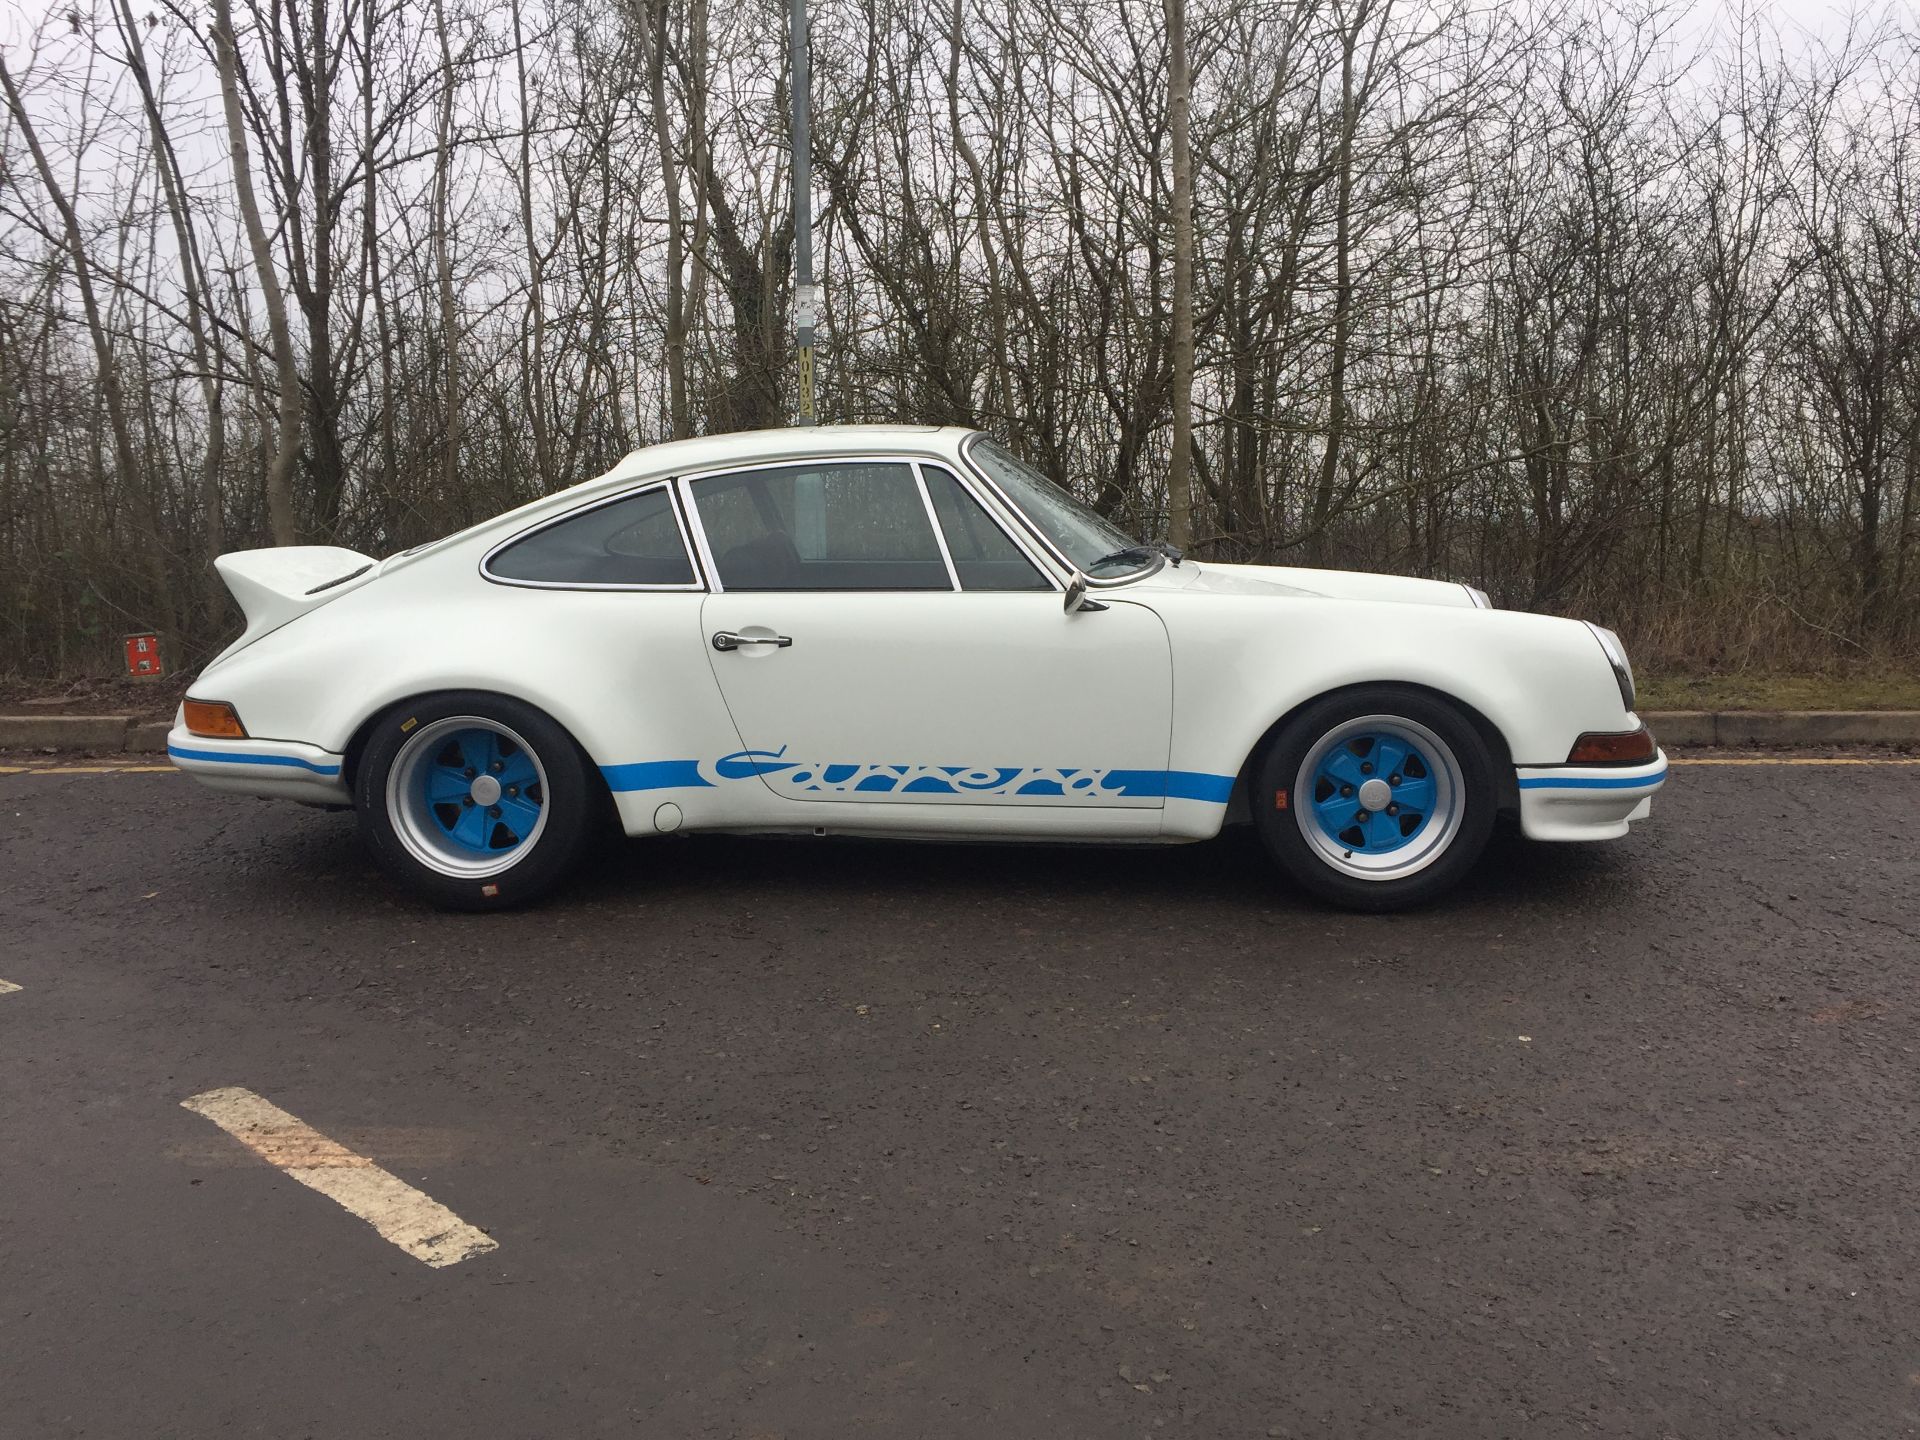 Porsche 911 Carrera 2.7 Rs Recreation - Pro 9 Build Based On A 1986 Porsche 911 **Reserve reduced** - Image 10 of 21